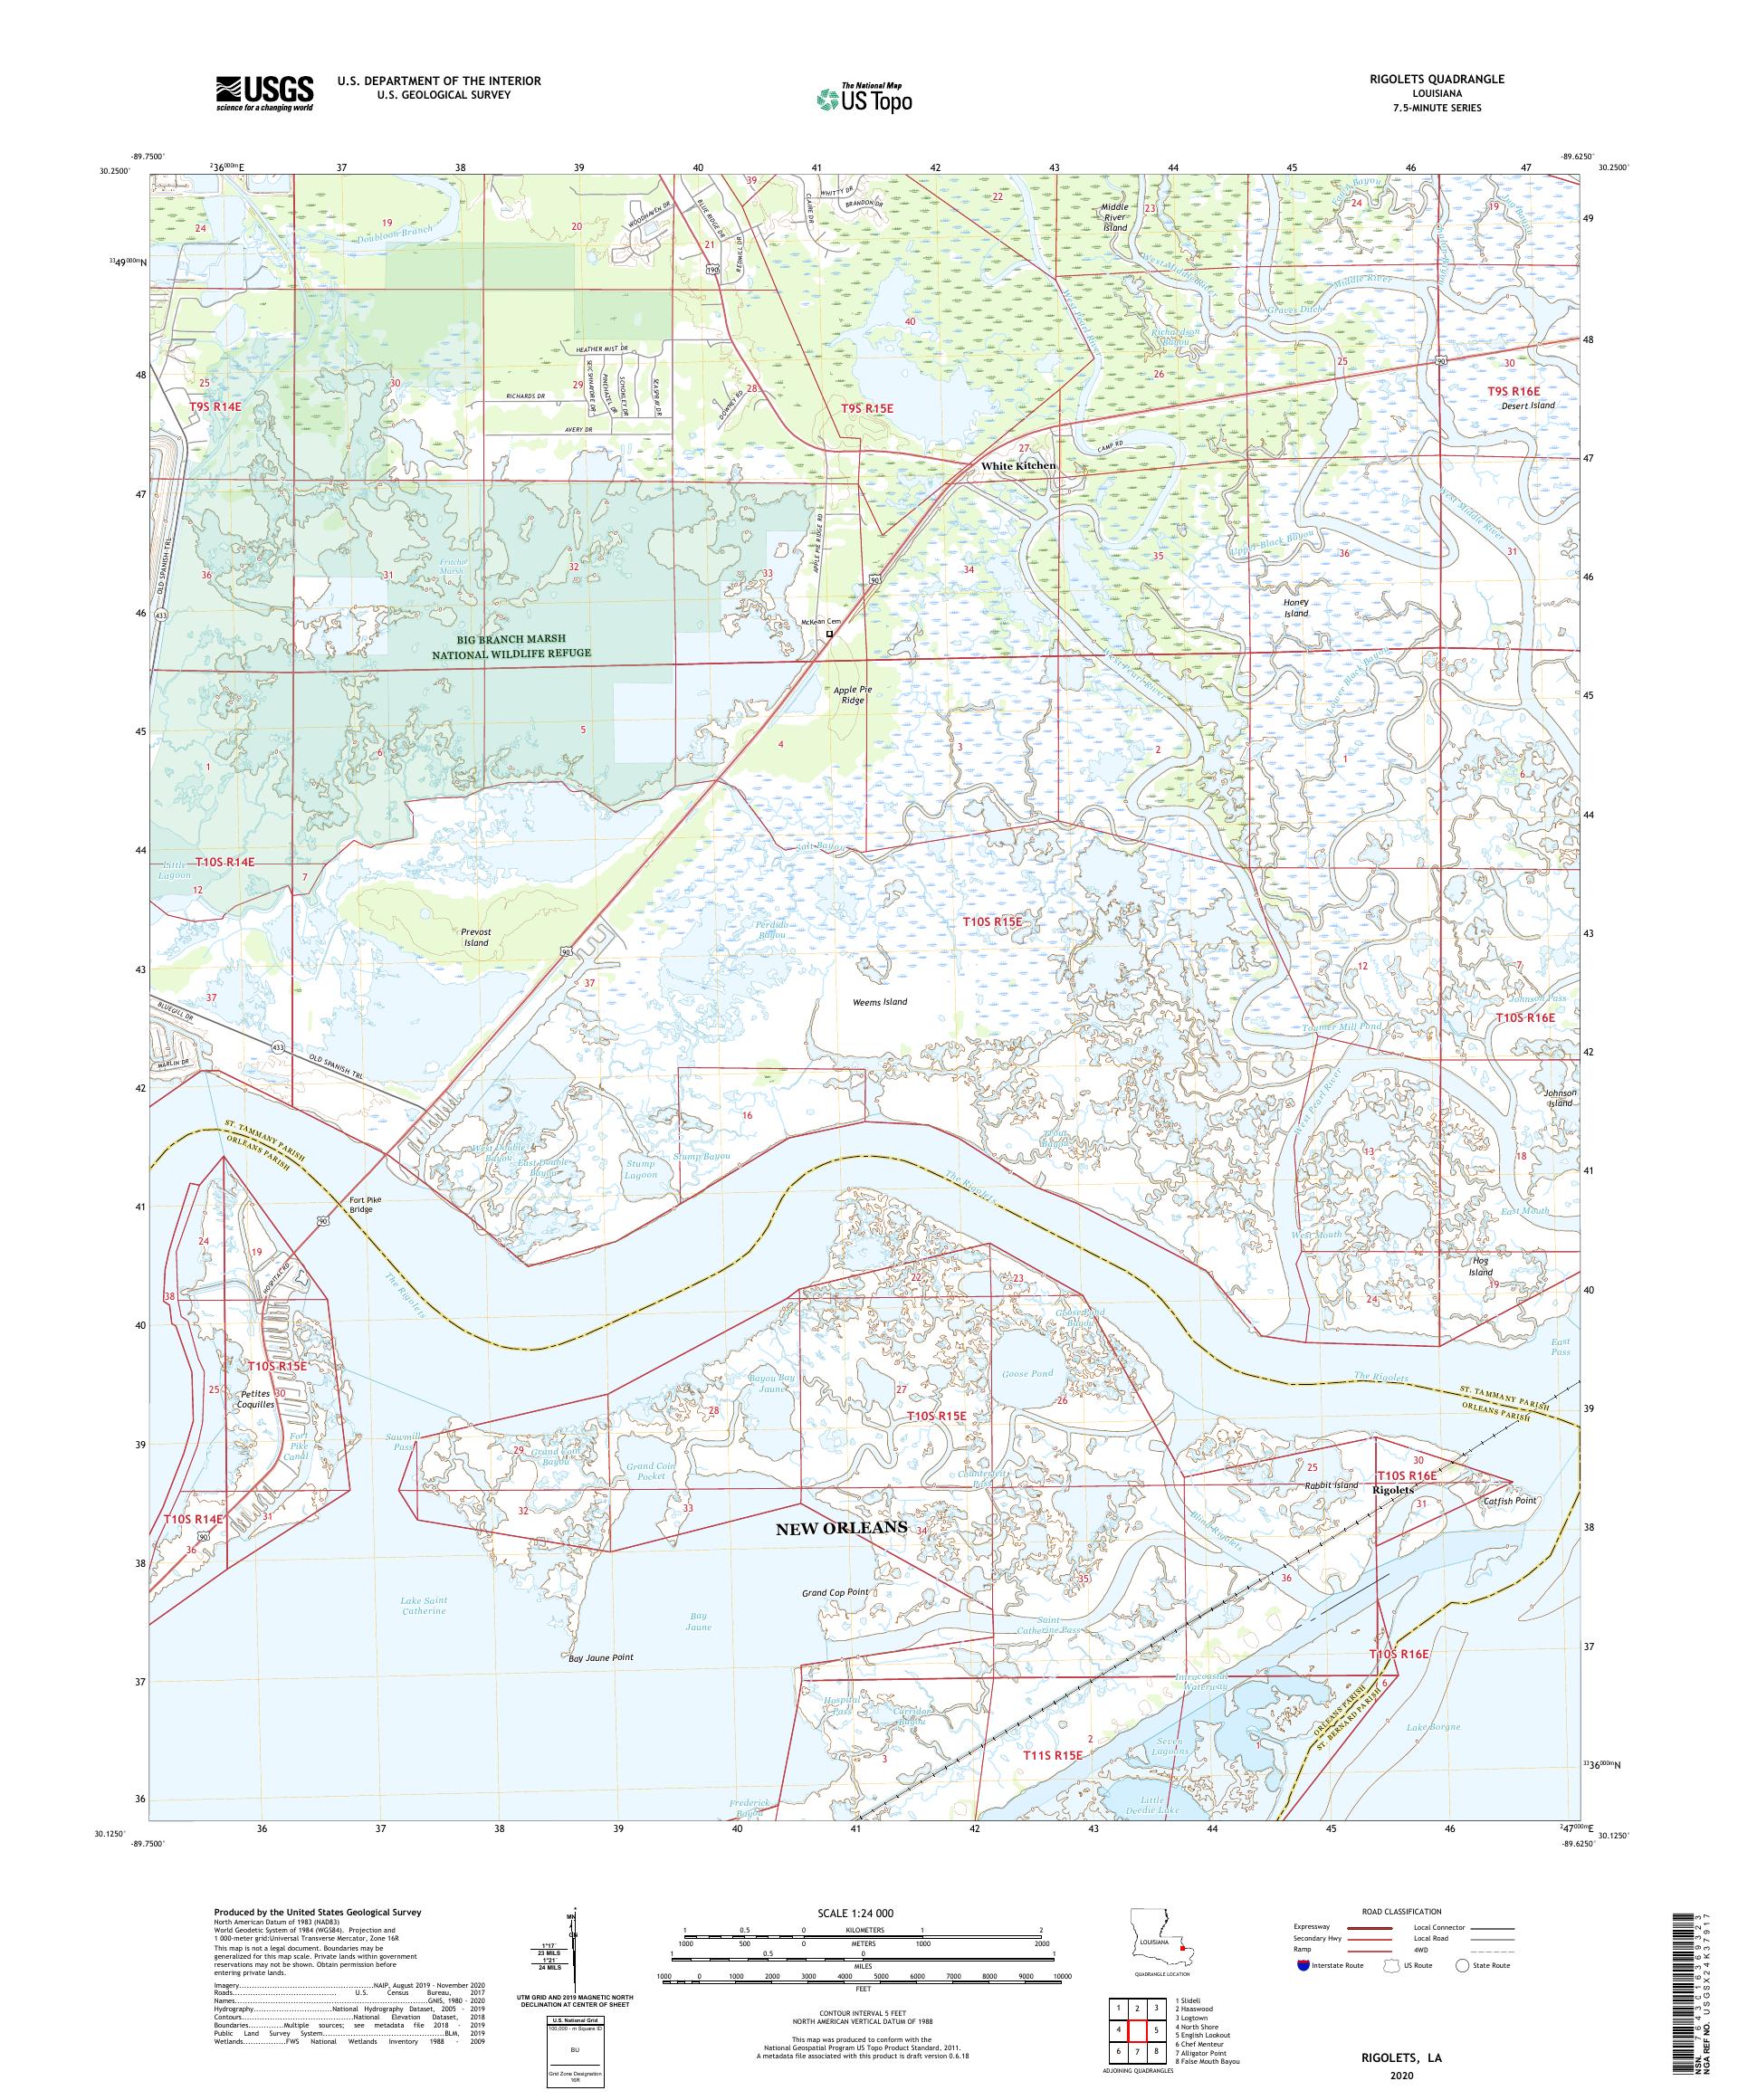 Map of the Rigolet and the mouth of the Pearl River, Louisiana and